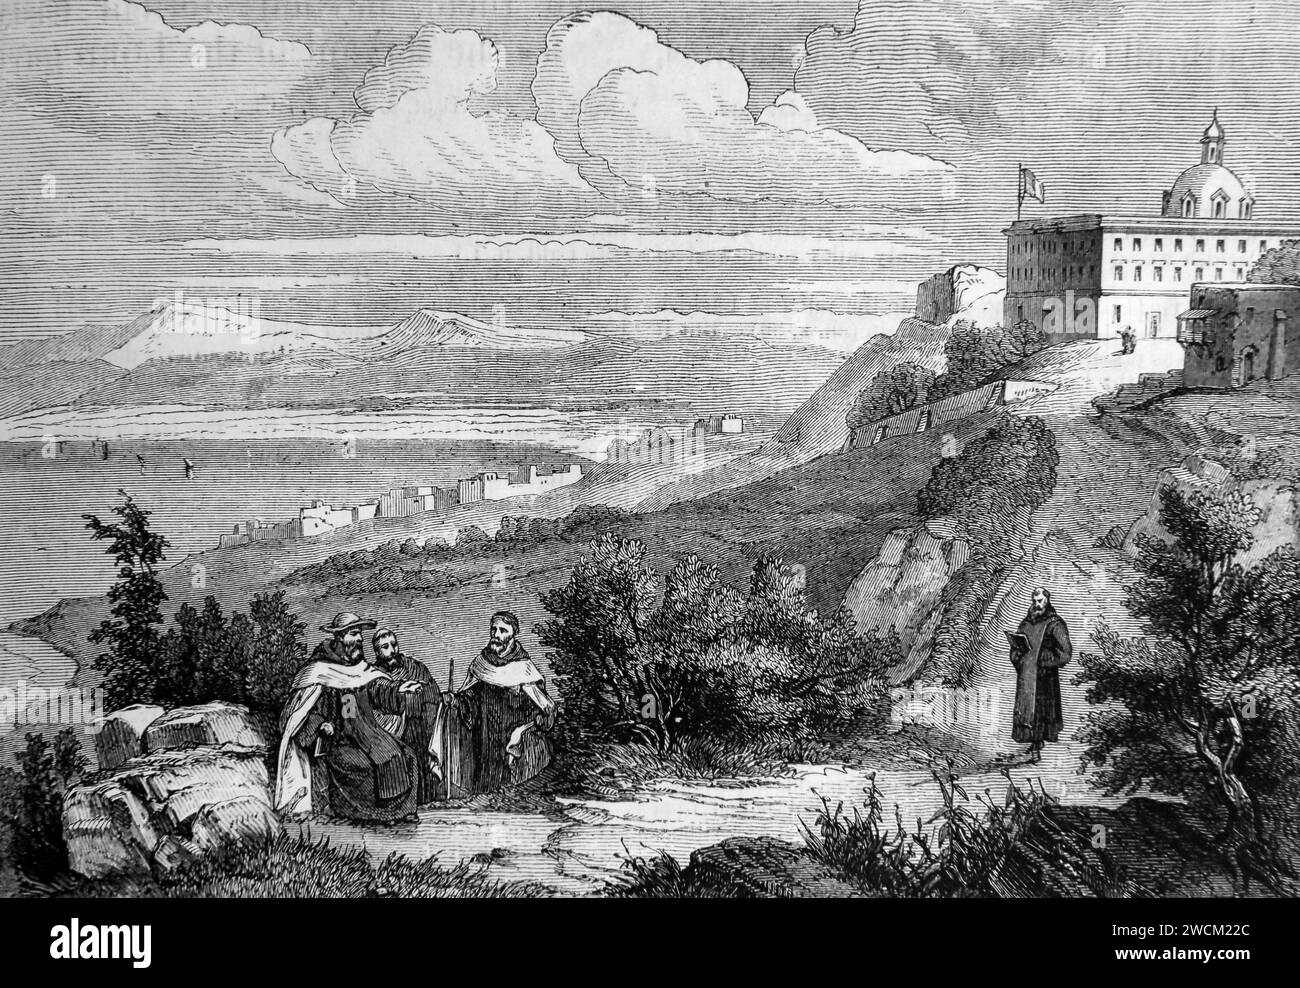 Illustration of Biblical scene of Monks at Mount Carmel from Illustrated Family Bible Stock Photo